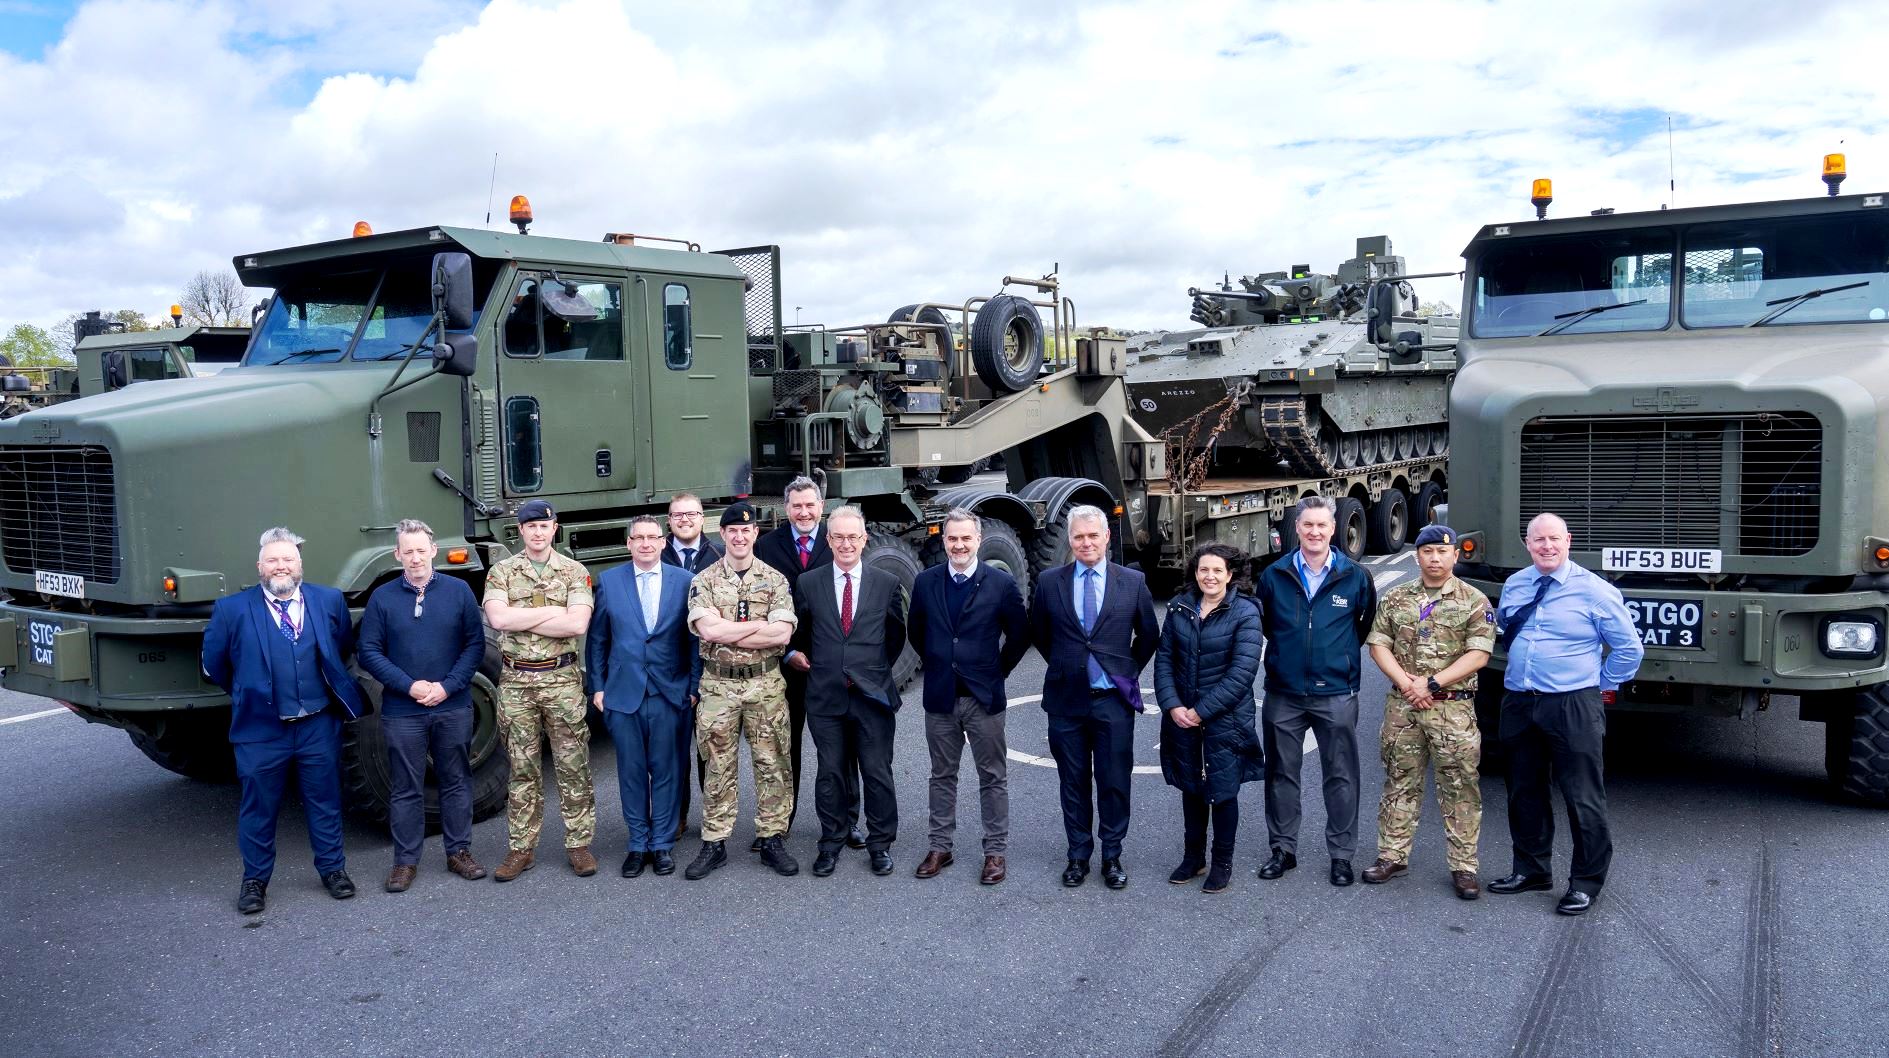 DE&S secures transport vehicles for British Army